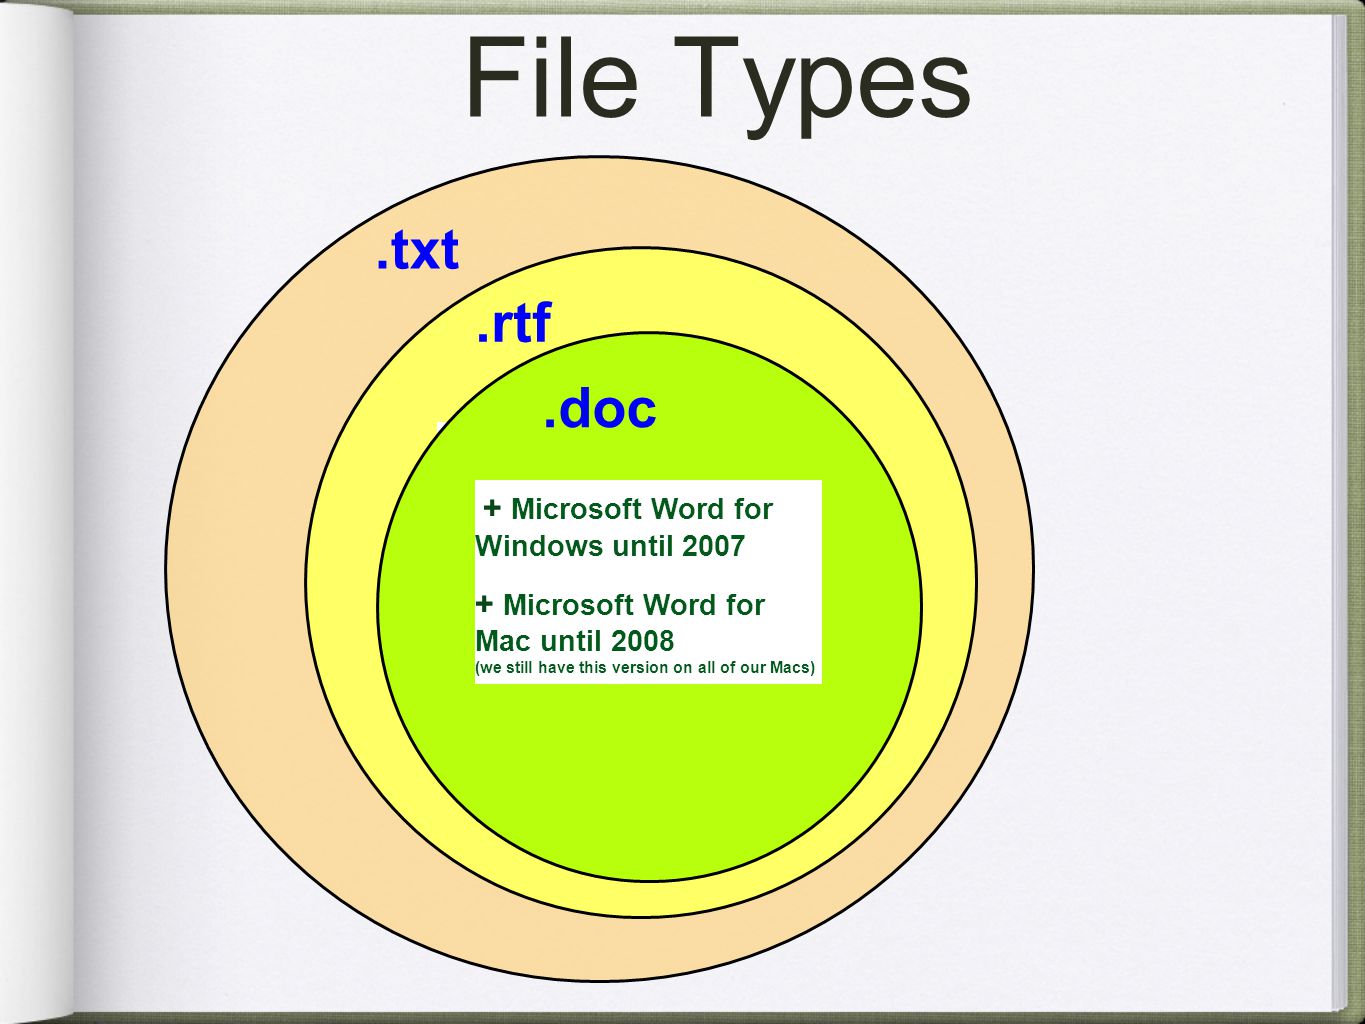 File Types.txt Sample Apps: Notepad TextEdit Stickies + Opens immediately + Every word processor in the world can read it - No formatting available.txt.rtf Rich Text Format + Retains most of the formatting + Most word processors can read - Tables, fonts might be lost Sample Apps: Appleworks Word Perfect All Open Source docs.doc + Microsoft Word for Windows until Microsoft Word for Mac until 2008 (we still have this version on all of our Macs)